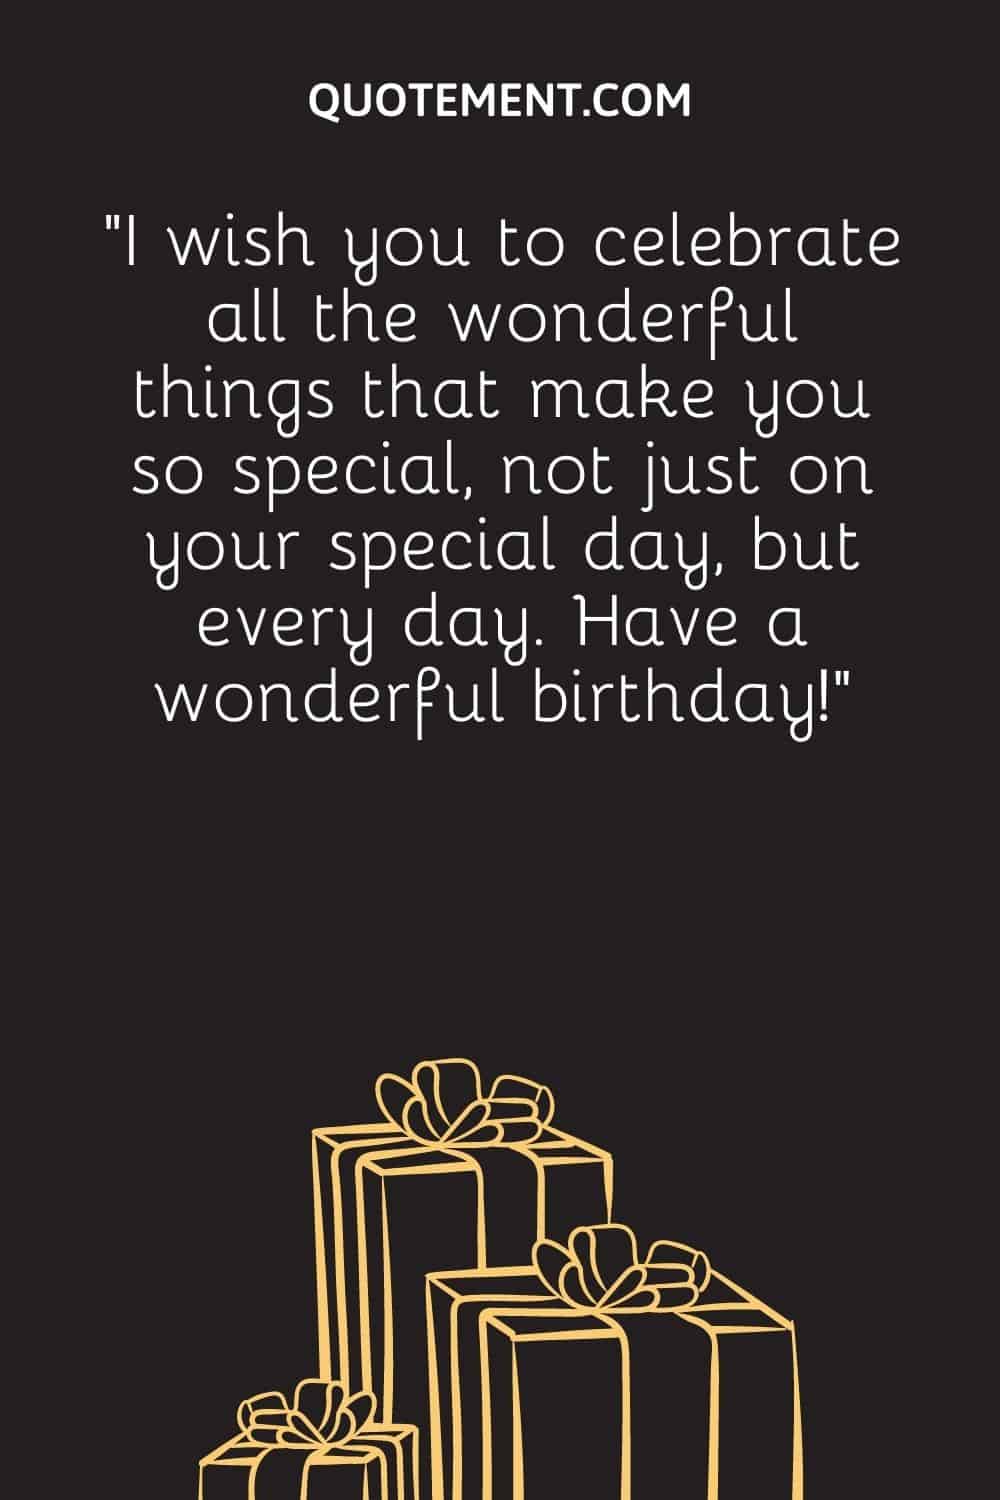 “I wish you to celebrate all the wonderful things that make you so special, not just on your special day, but every day. Have a wonderful birthday!”